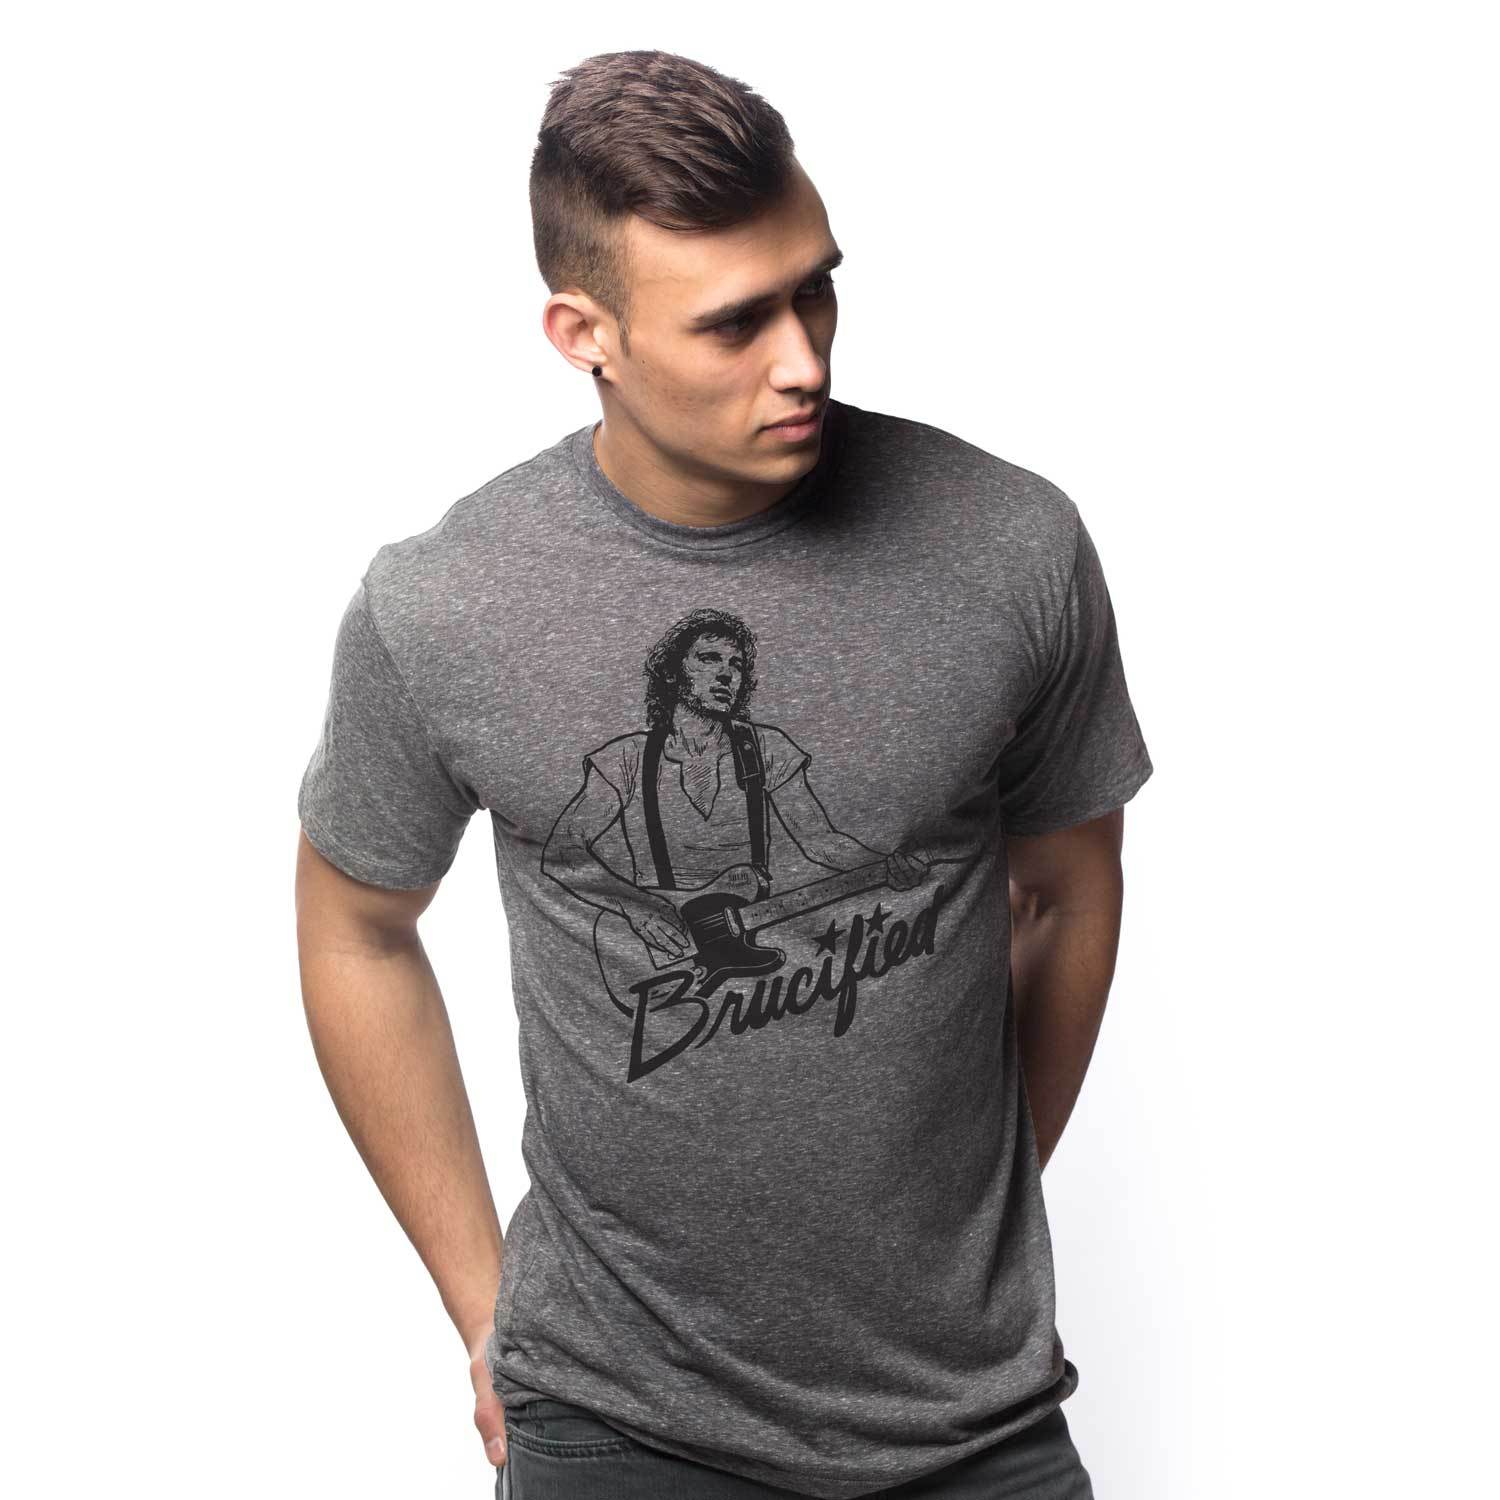 Men's Brucified Cool Music Graphic T-Shirt | Vintage Bruce Springstein Tee on Model | Solid Threads